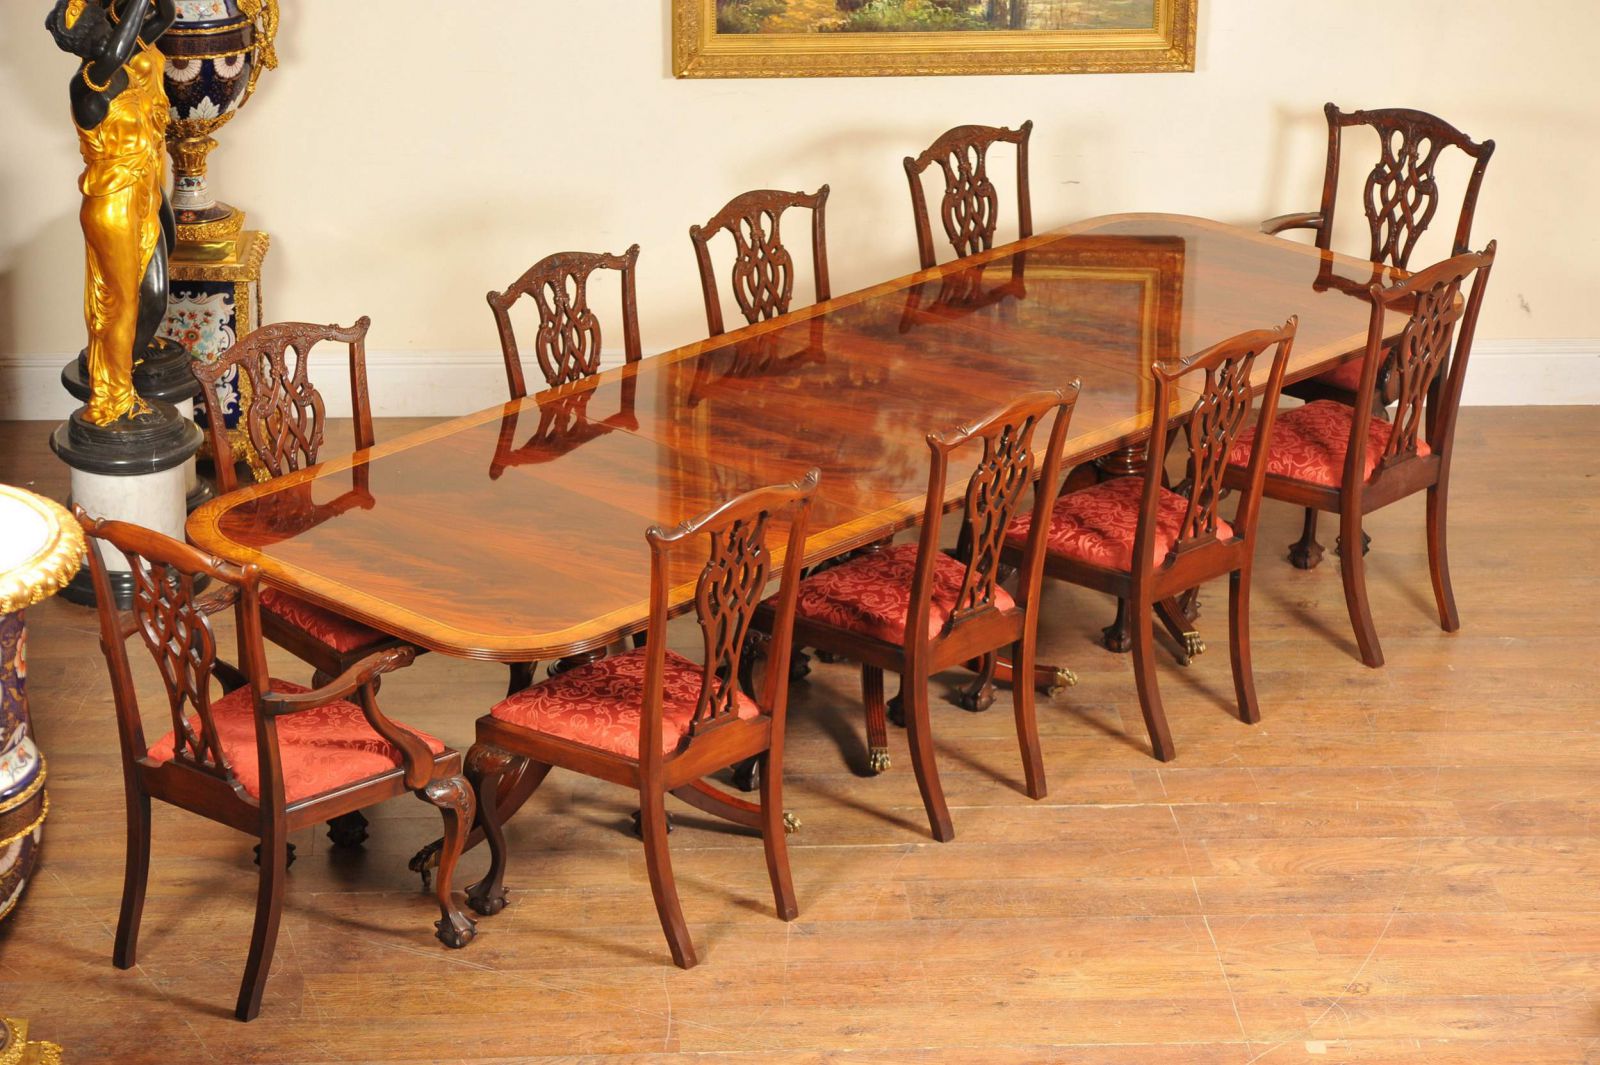 Such a refined look to this Regency table and Chippendale chairs